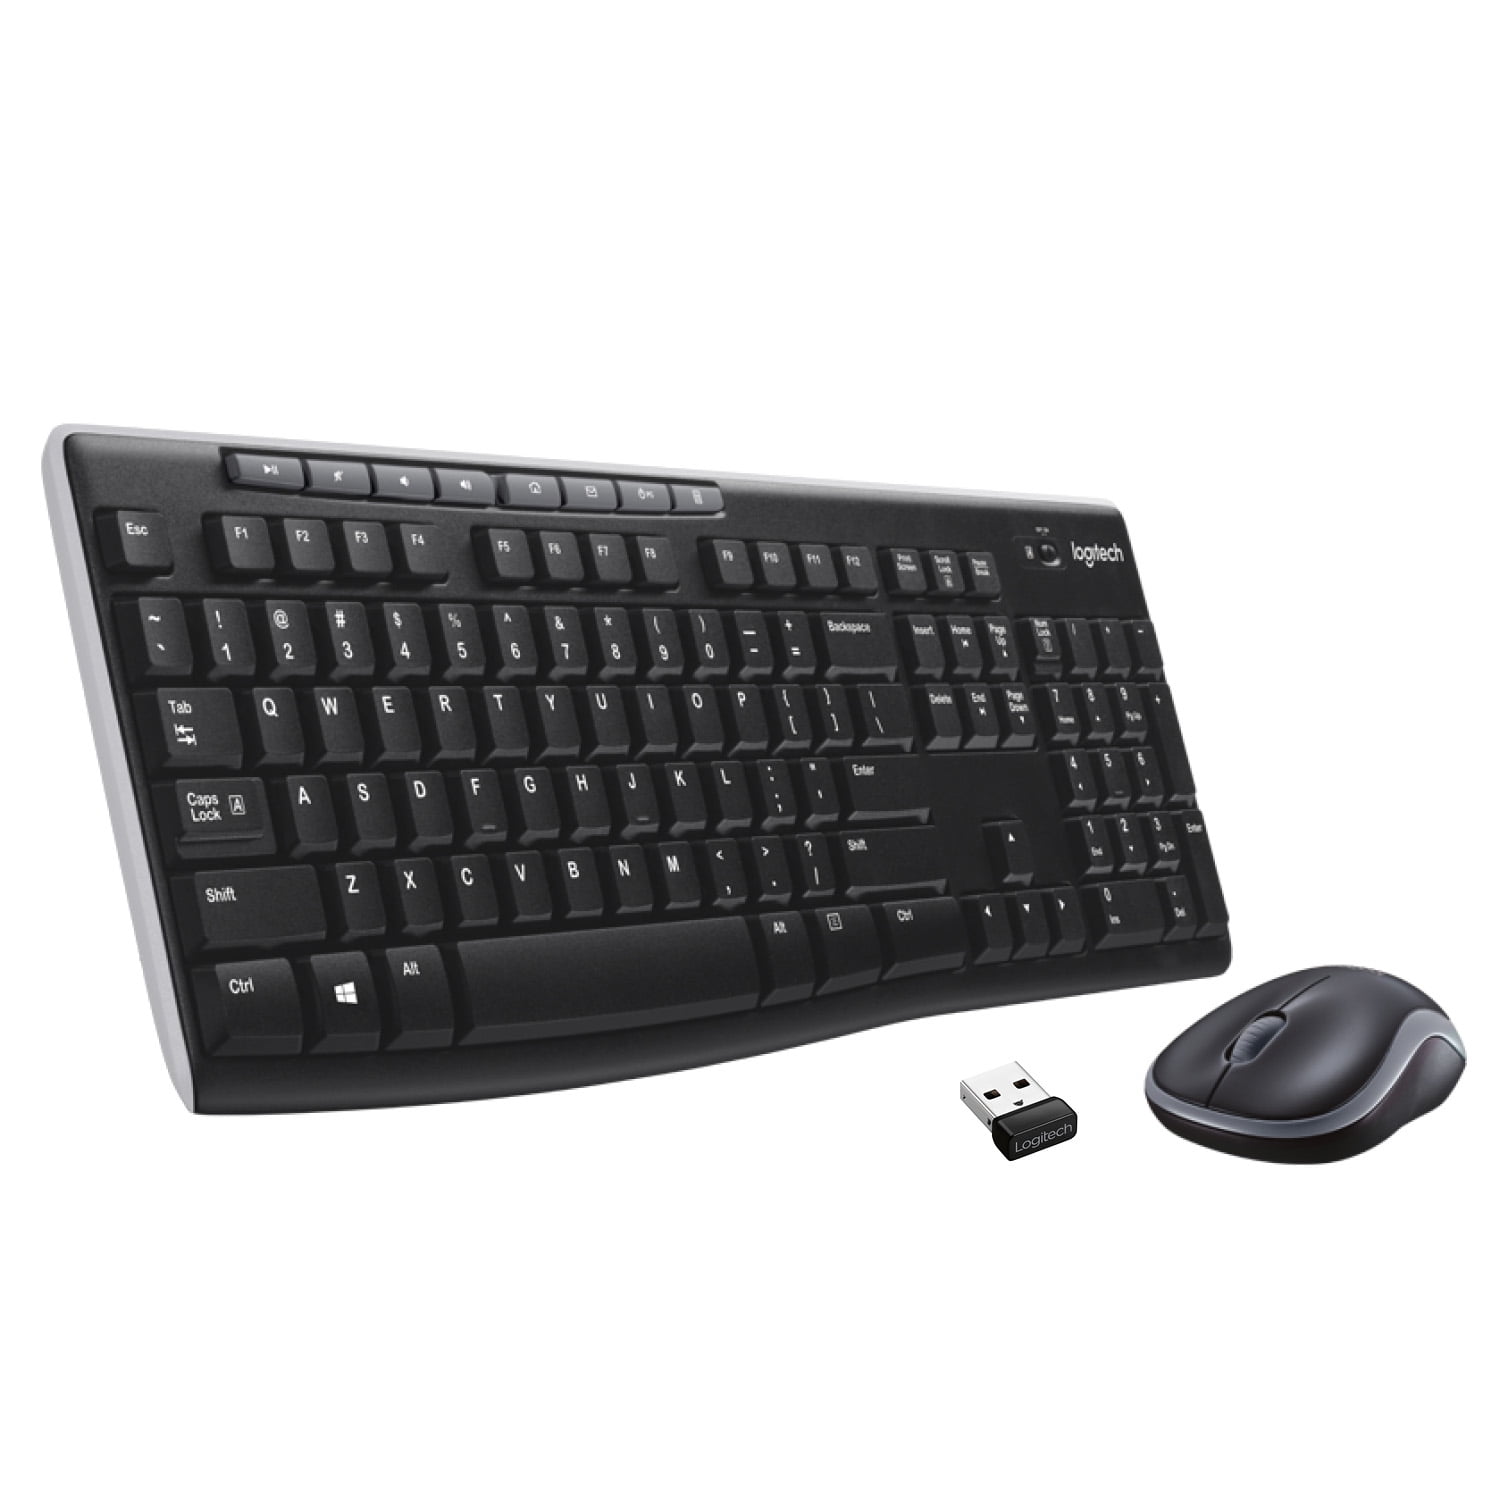 Logitech Wireless Keyboard and Mouse Combo for Windows - 2.4 GHz Wireless - 8 Multimedia and Shortcut Keys - 2-Year Battery Life for PC Laptop